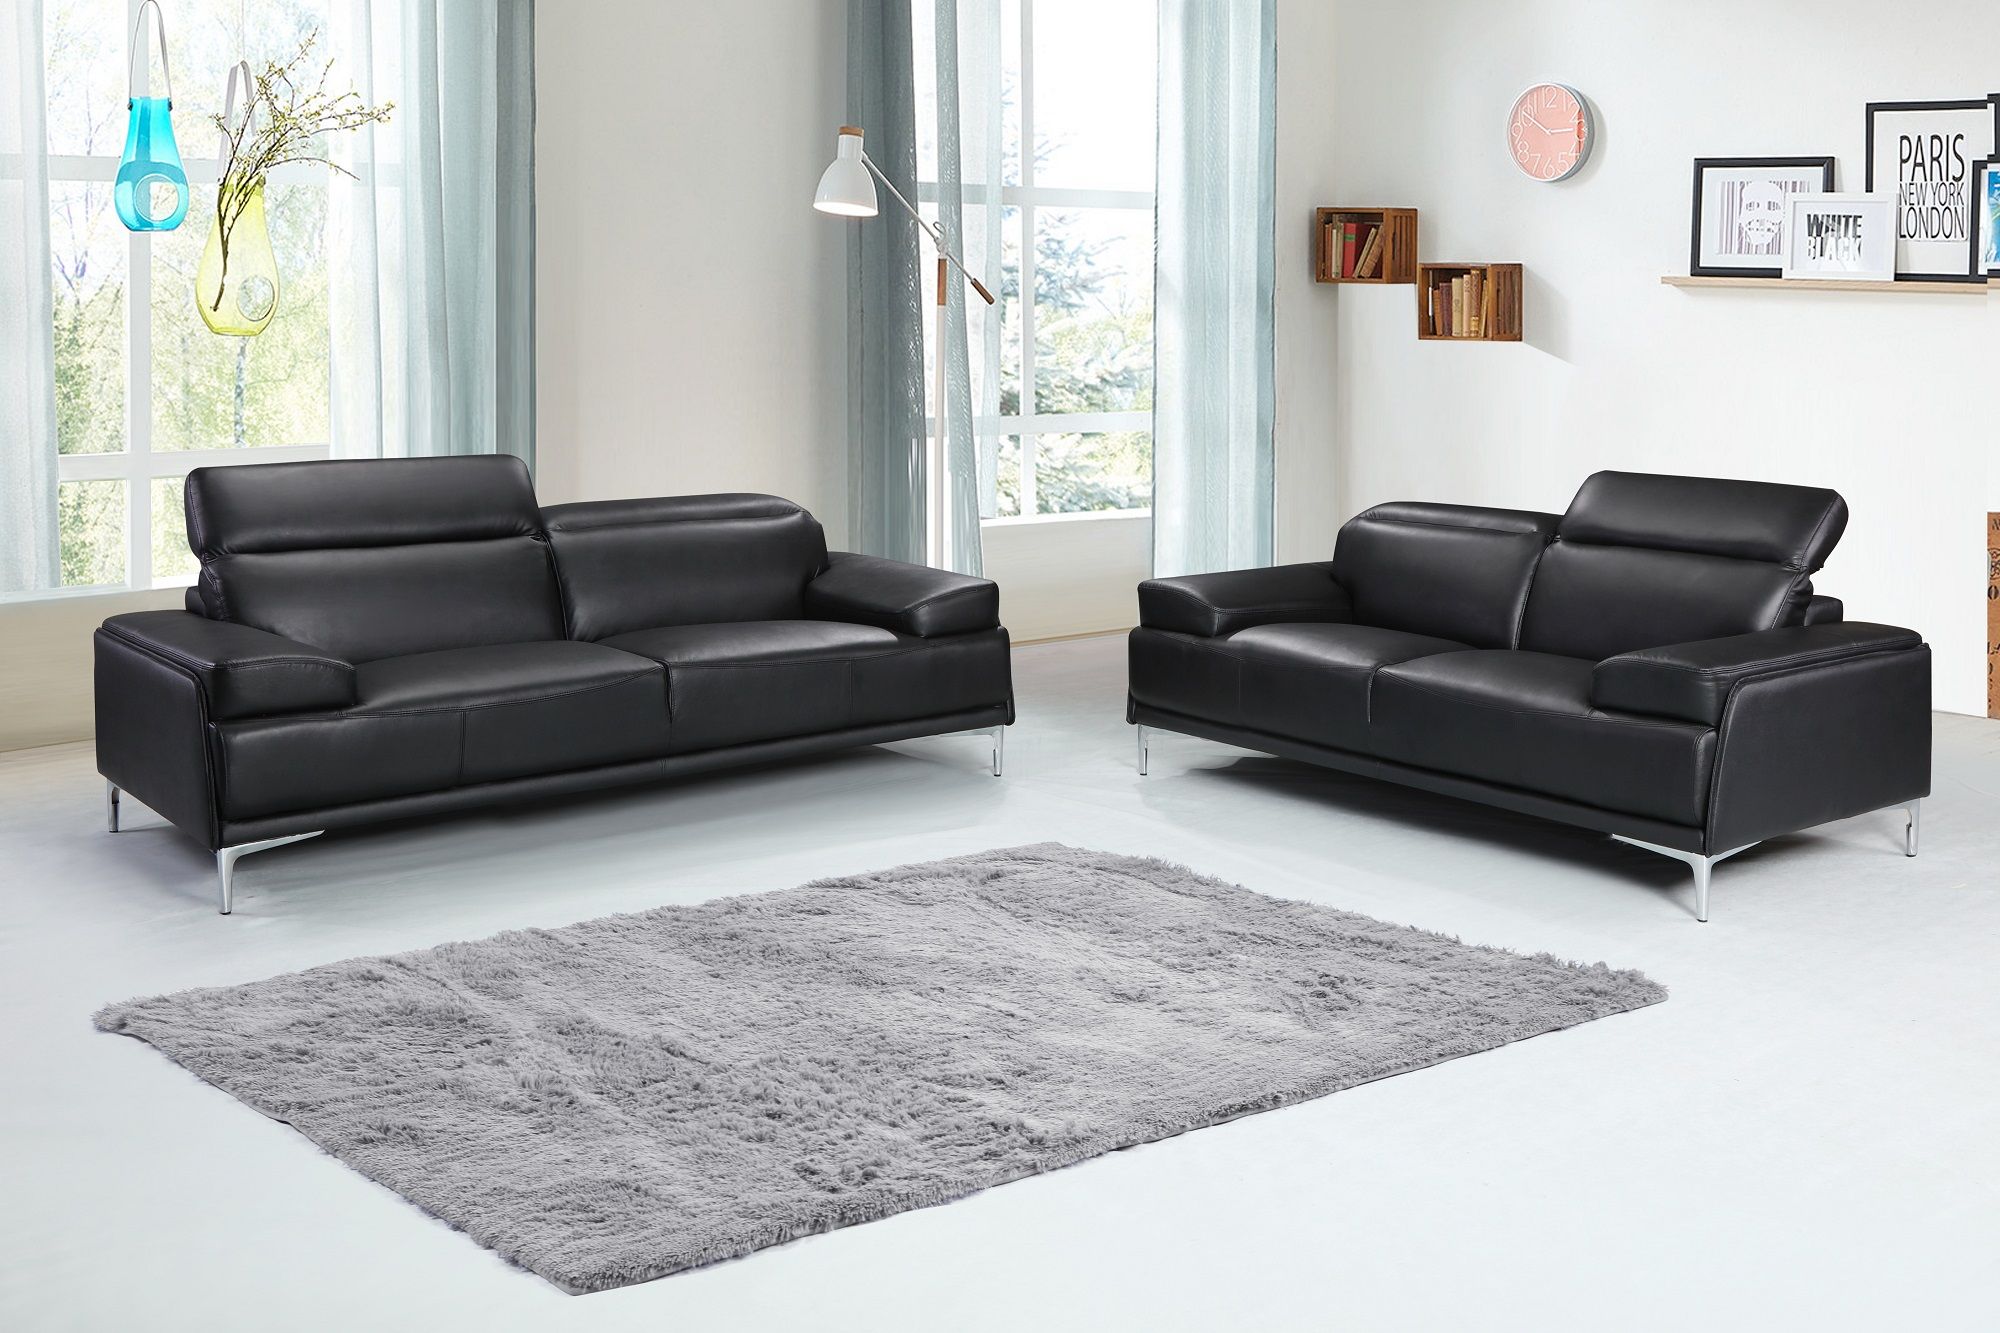 Contemporary Black Leather Living Room Sofa Set Minneapolis Minnesota J With Sofas In Black (Gallery 9 of 20)